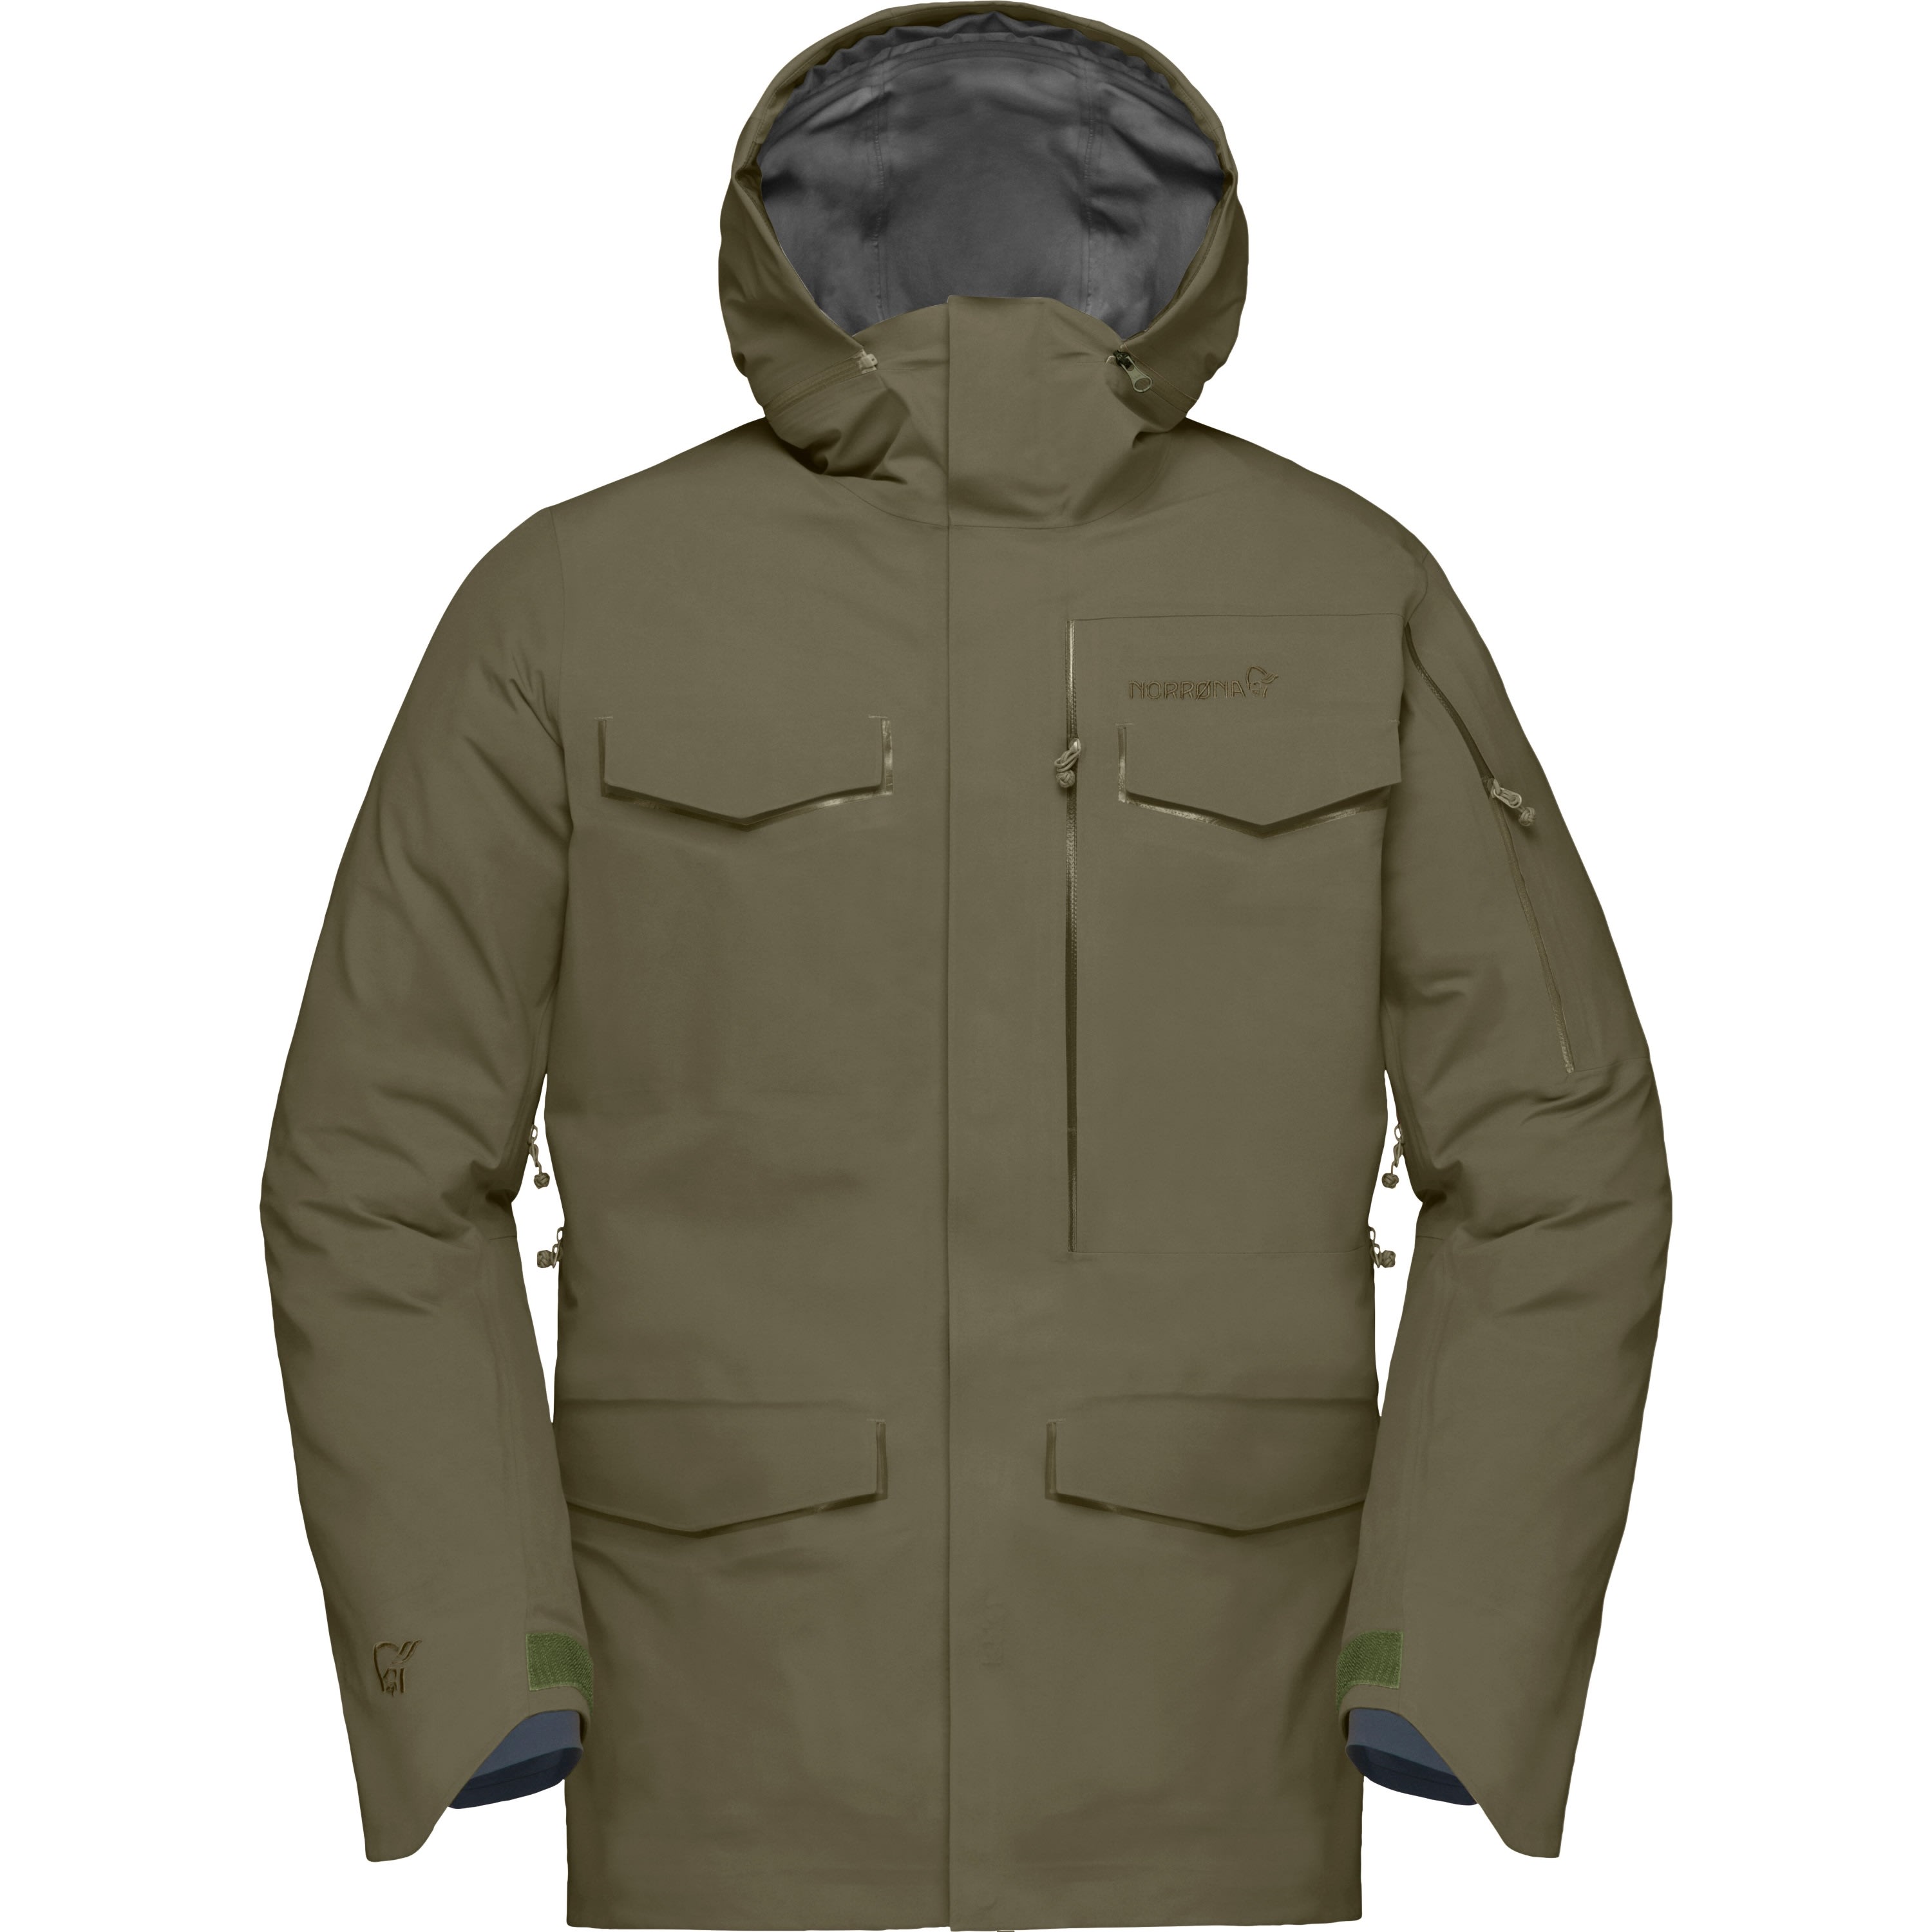 Buy Norrona Roldal Gore Tex Jacket Men S From Outnorth